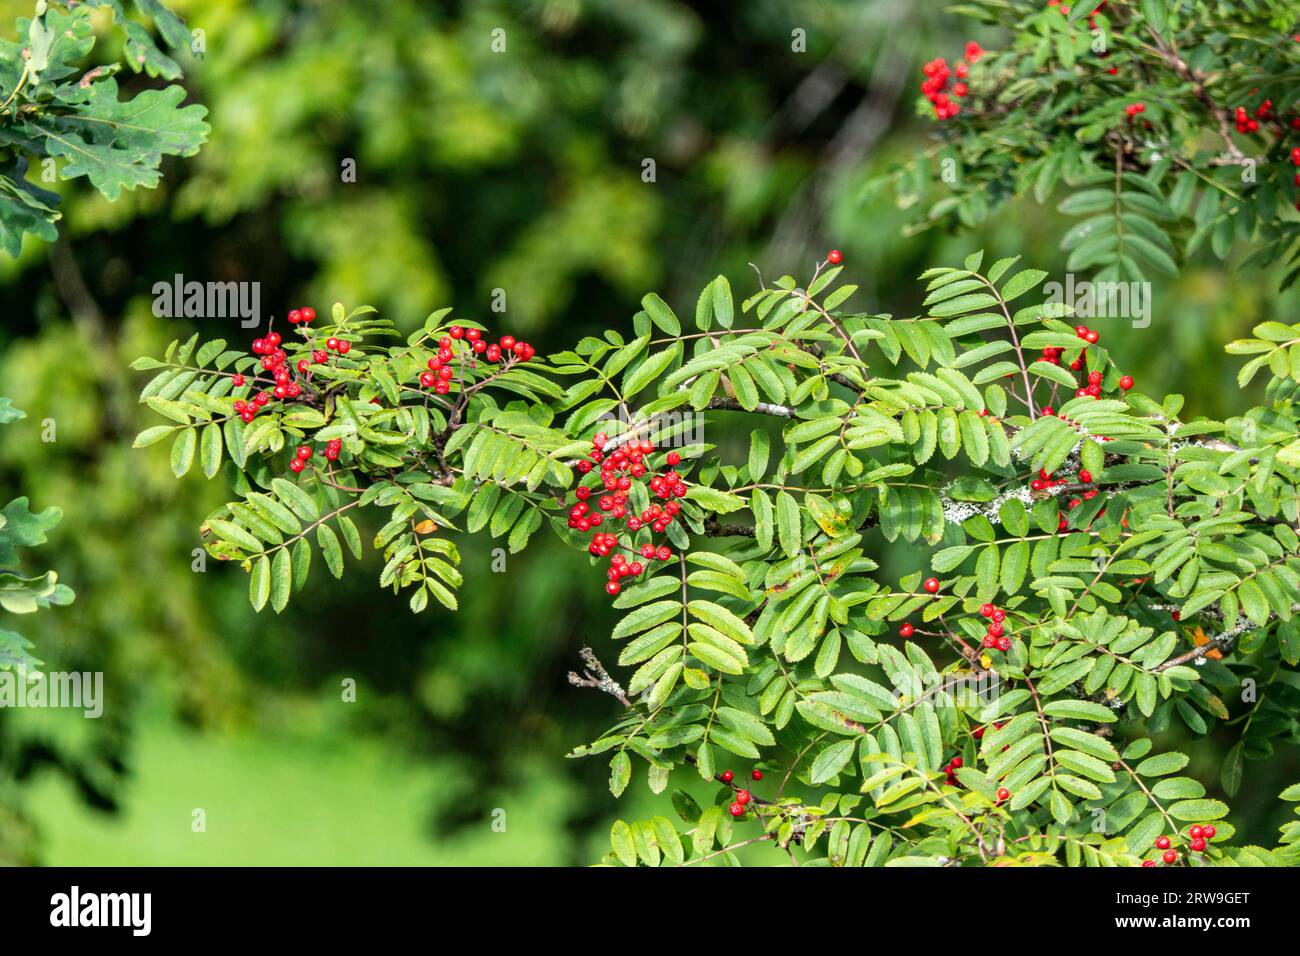 Stunning close-up of red ripe rowan berries among green leaves. Vibrant red berries against the backdrop of the leaves. Natural light, highlighting th Stock Photo